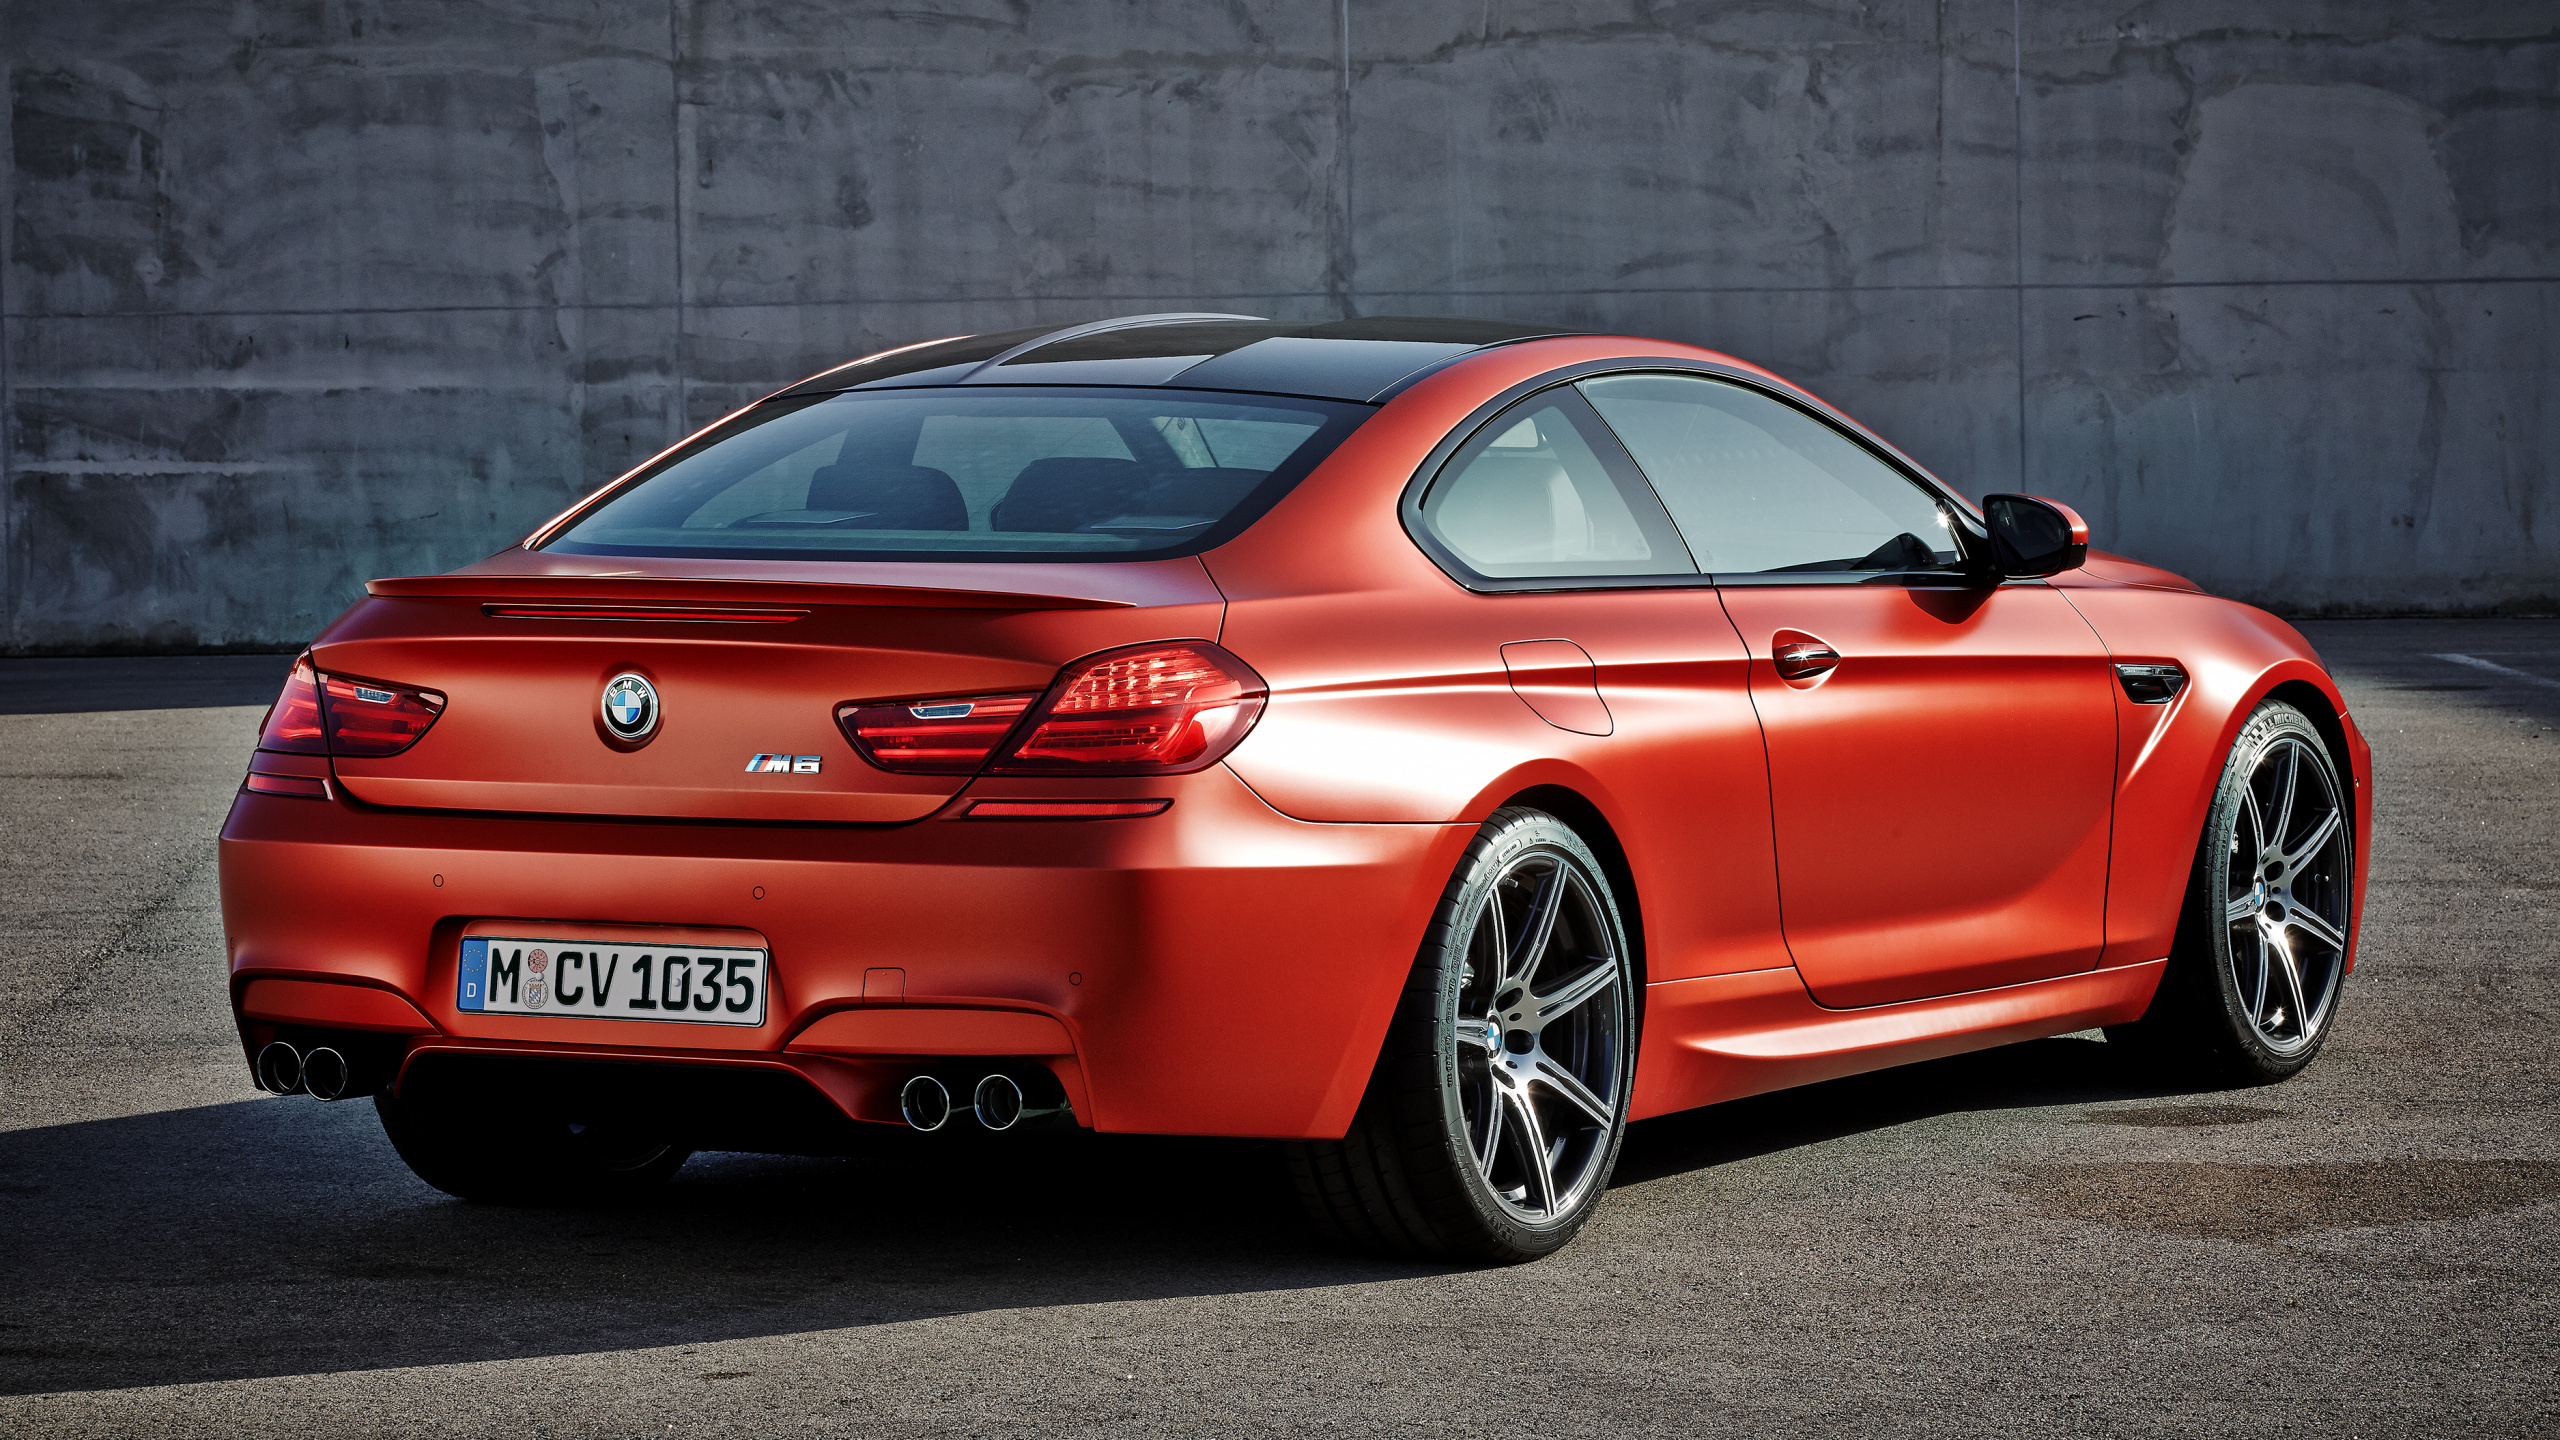 Red Bmw m 3 Coupe. Wallpaper in 2560x1440 Resolution